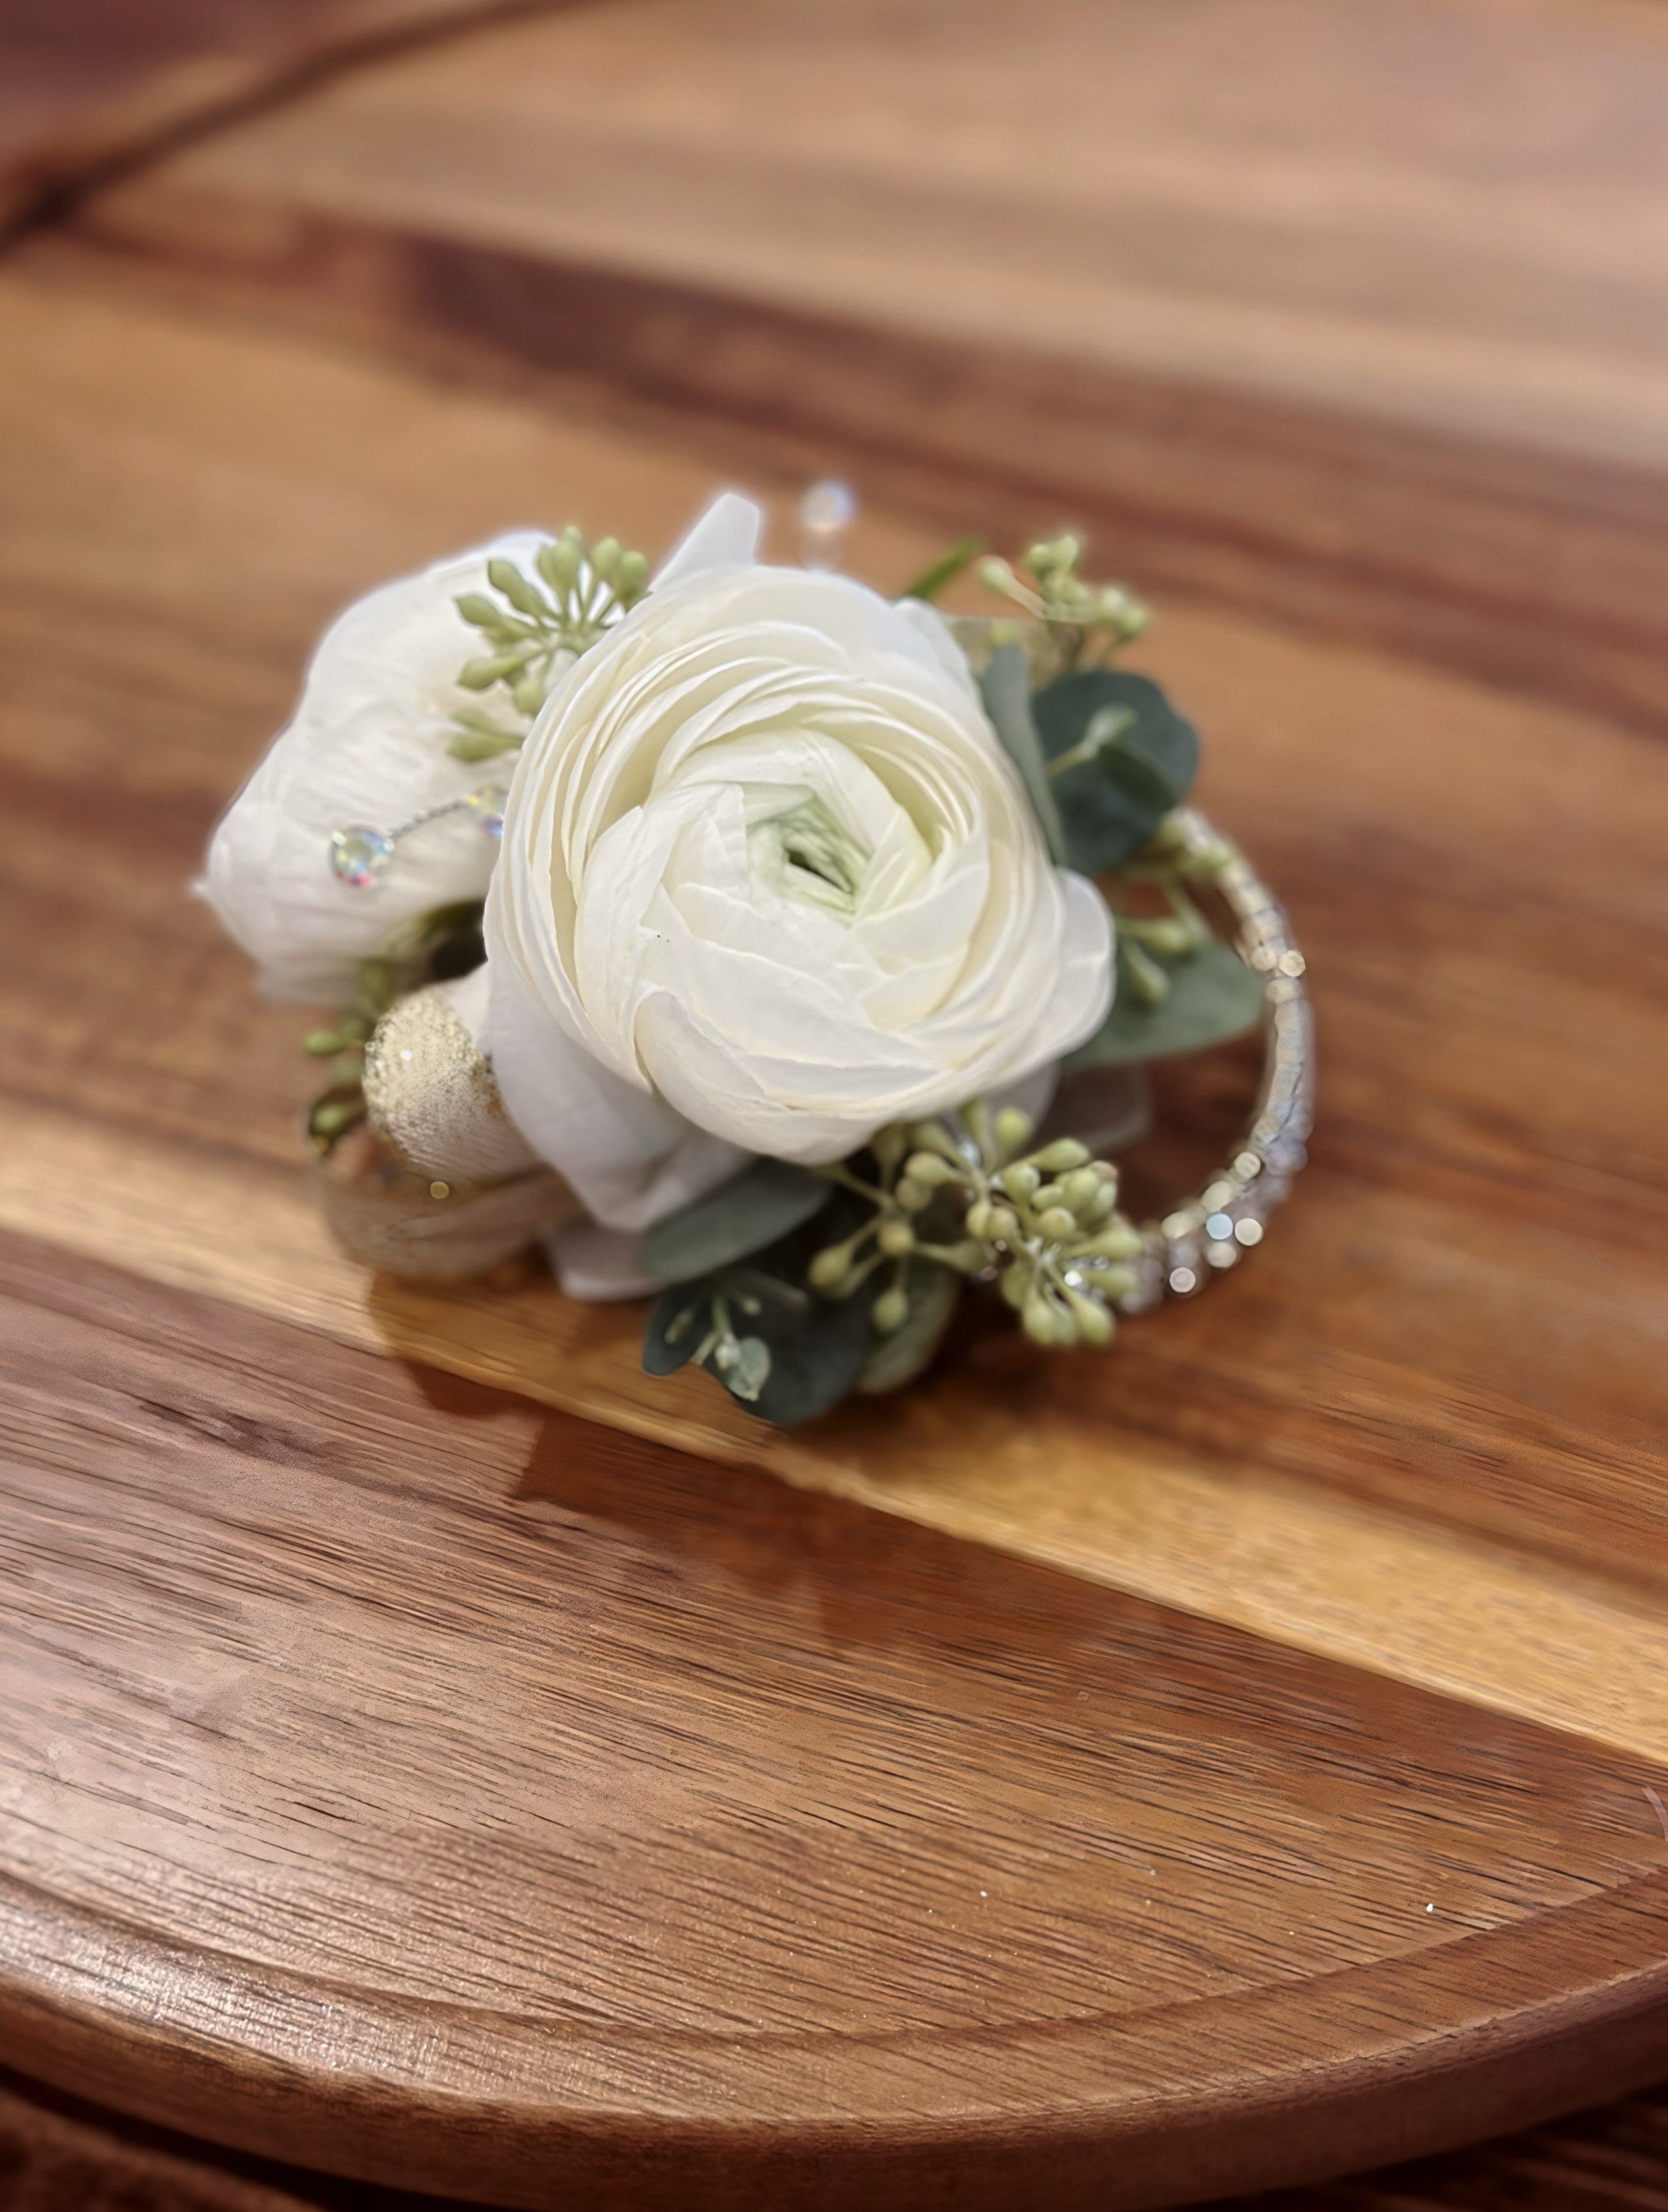 Specialty Wrist Corsage – Love Knots Floral